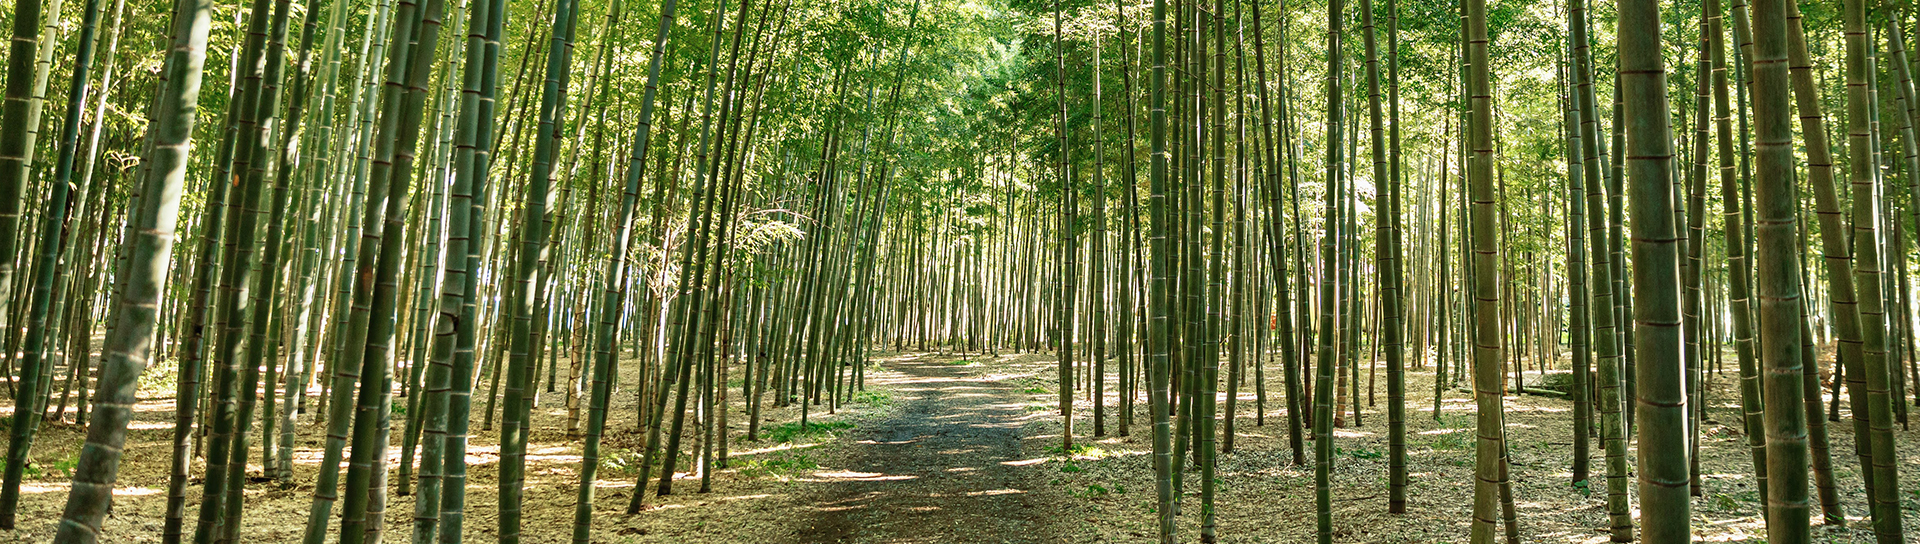 wide view of various bamboo trees